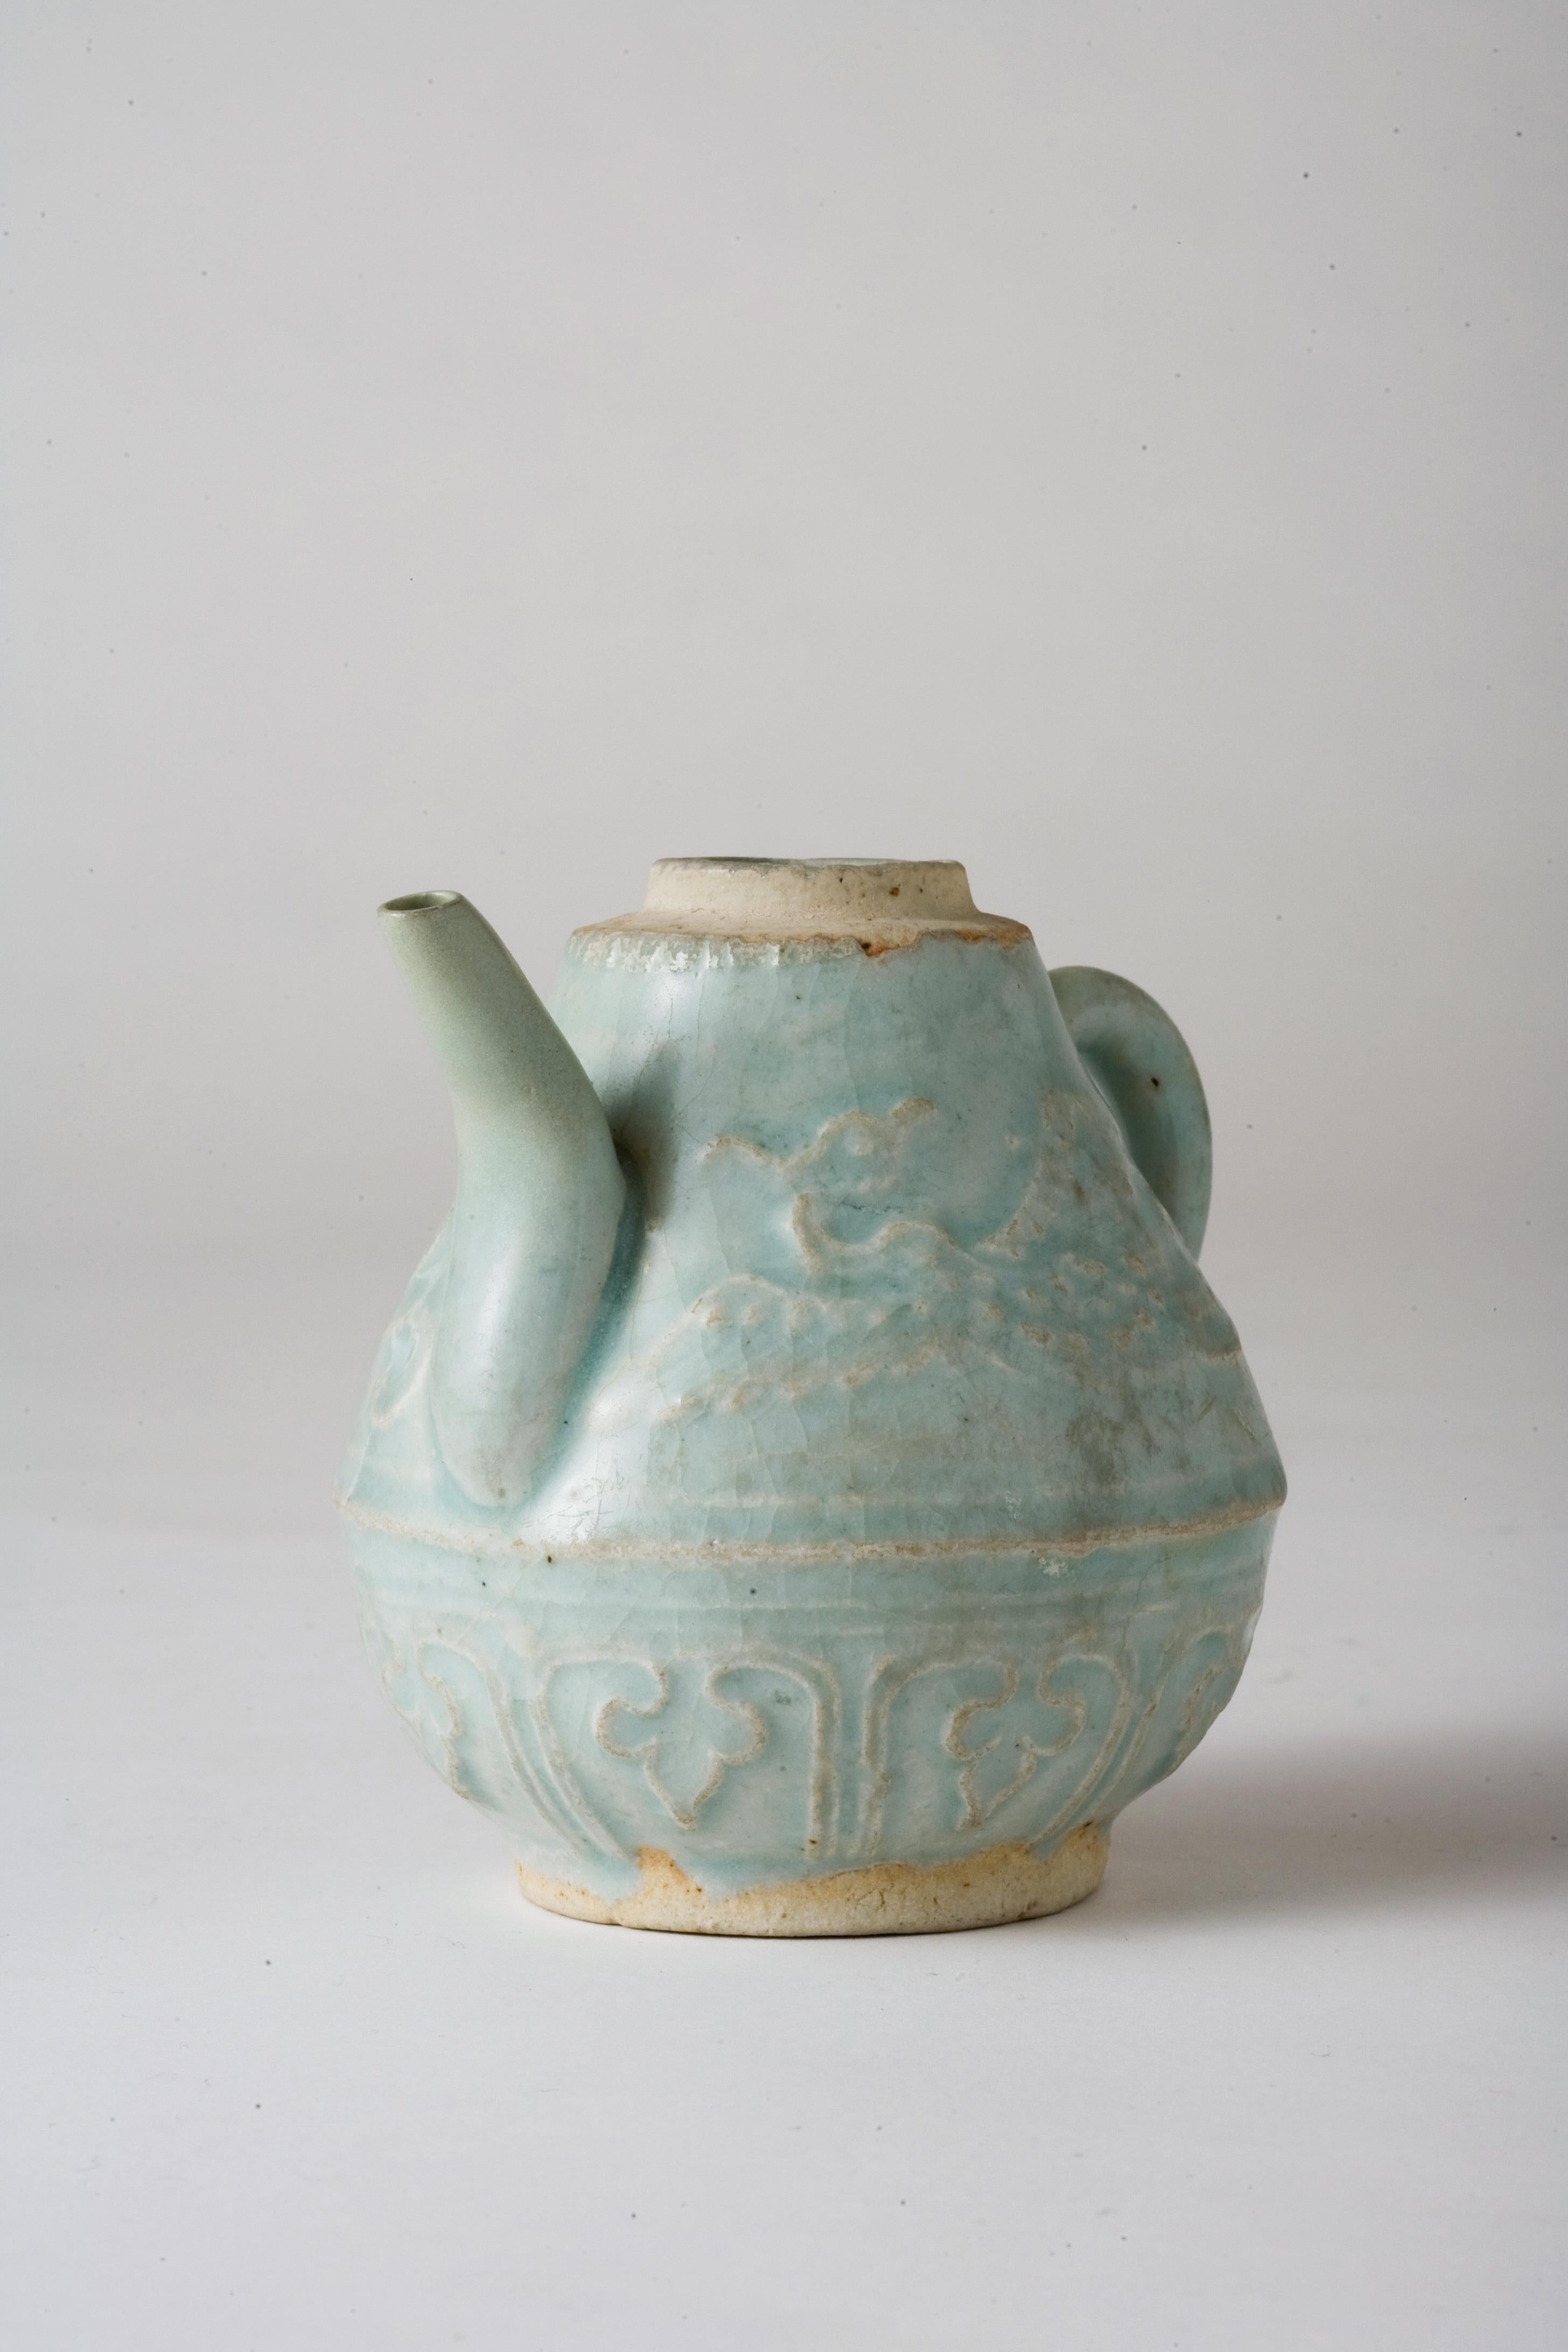 This small ewer is an exquisite example of Qingbai ware, known for its pale blue-tinged glaze. The vessel showcases the advanced ceramic techniques and artistic sophistication of the era. Its delicate form is enhanced by relief decorations depicting